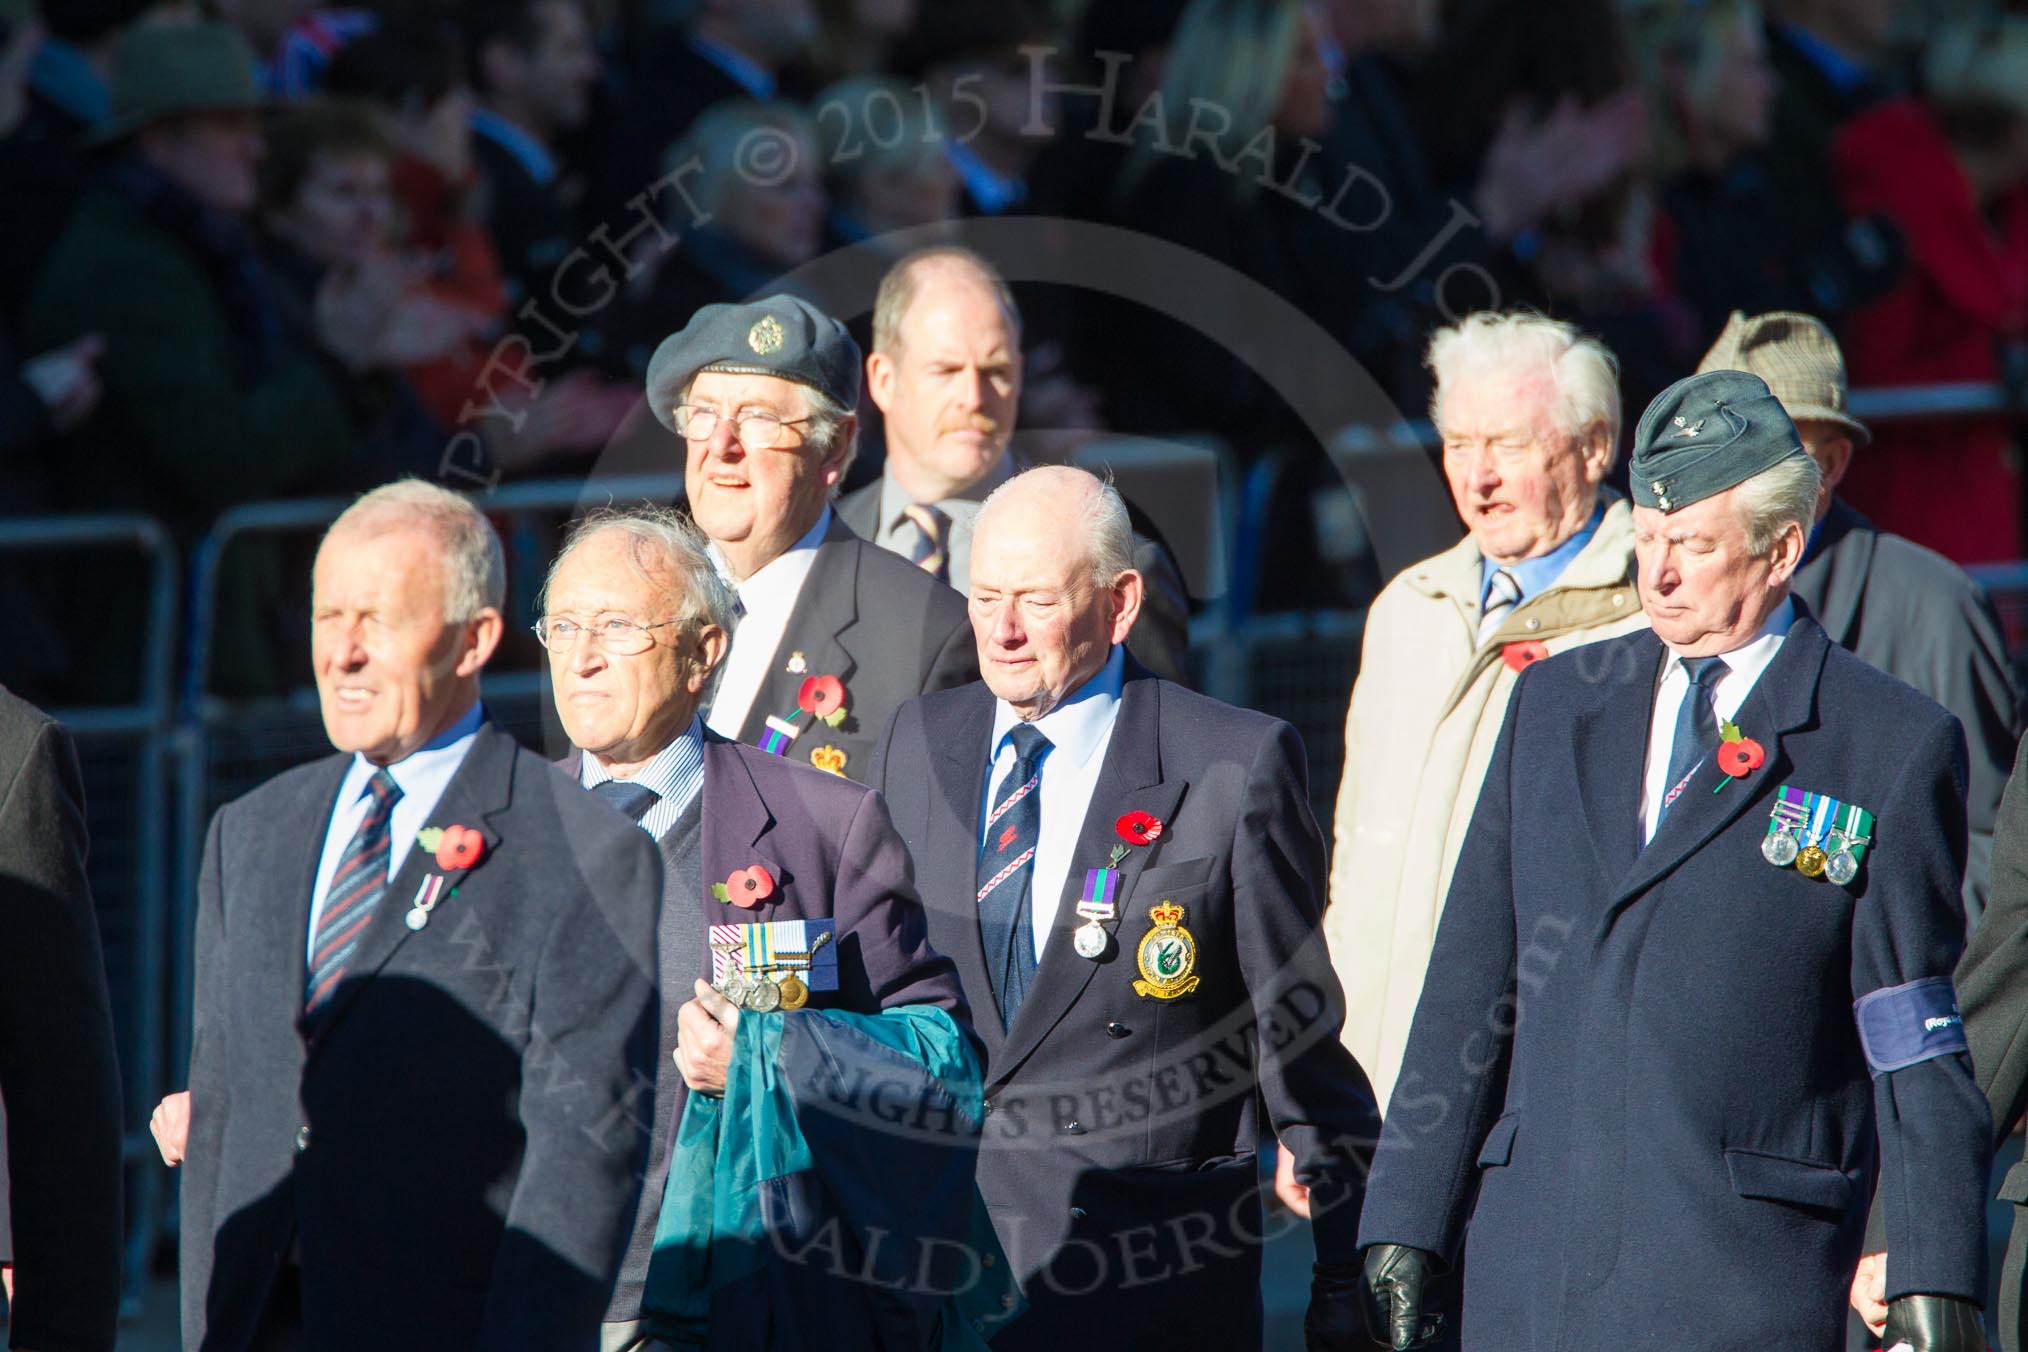 Remembrance Sunday Cenotaph March Past 2013: C11 - RAFLING Association..
Press stand opposite the Foreign Office building, Whitehall, London SW1,
London,
Greater London,
United Kingdom,
on 10 November 2013 at 12:07, image #1782